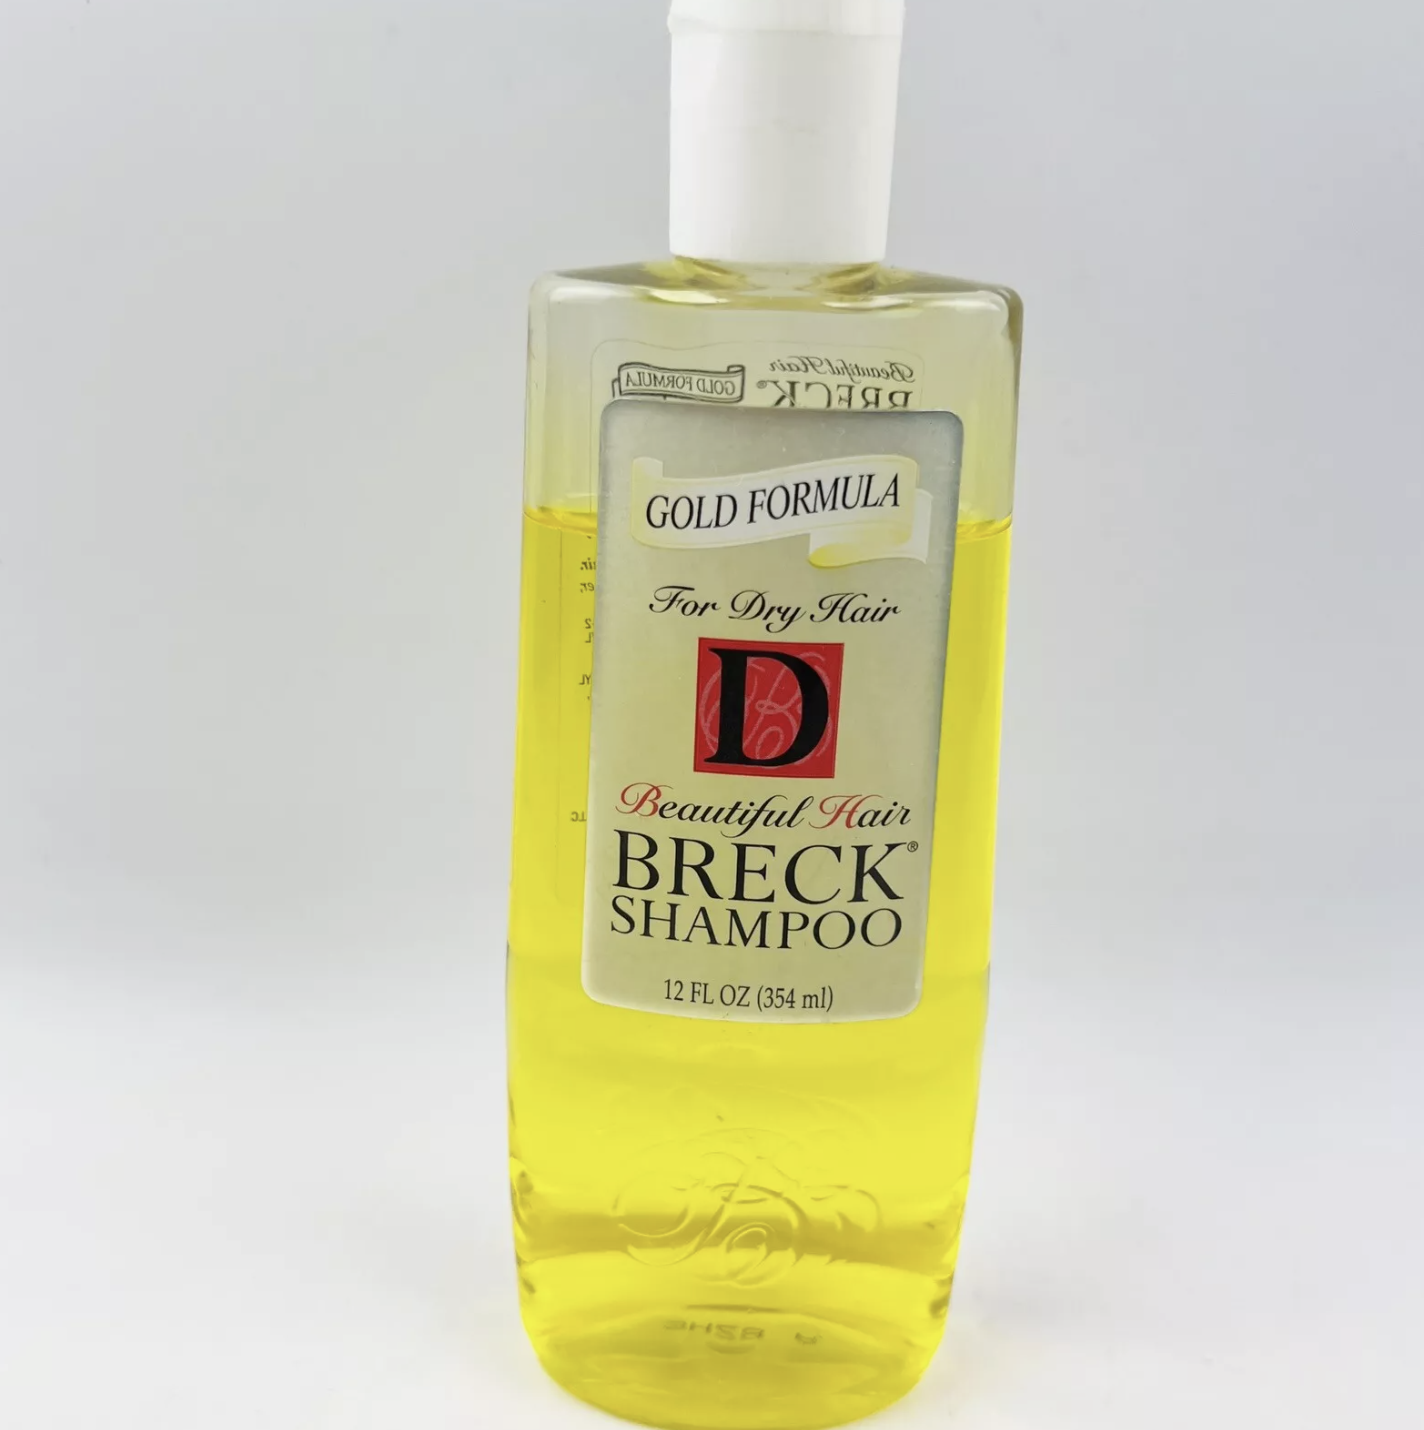 A bottle of Breck shampoo with the label reading &quot;Gold Formula, For Dry Hair, Beautiful Hair, Breck Shampoo, 12 FL OZ (354 mL)&quot;